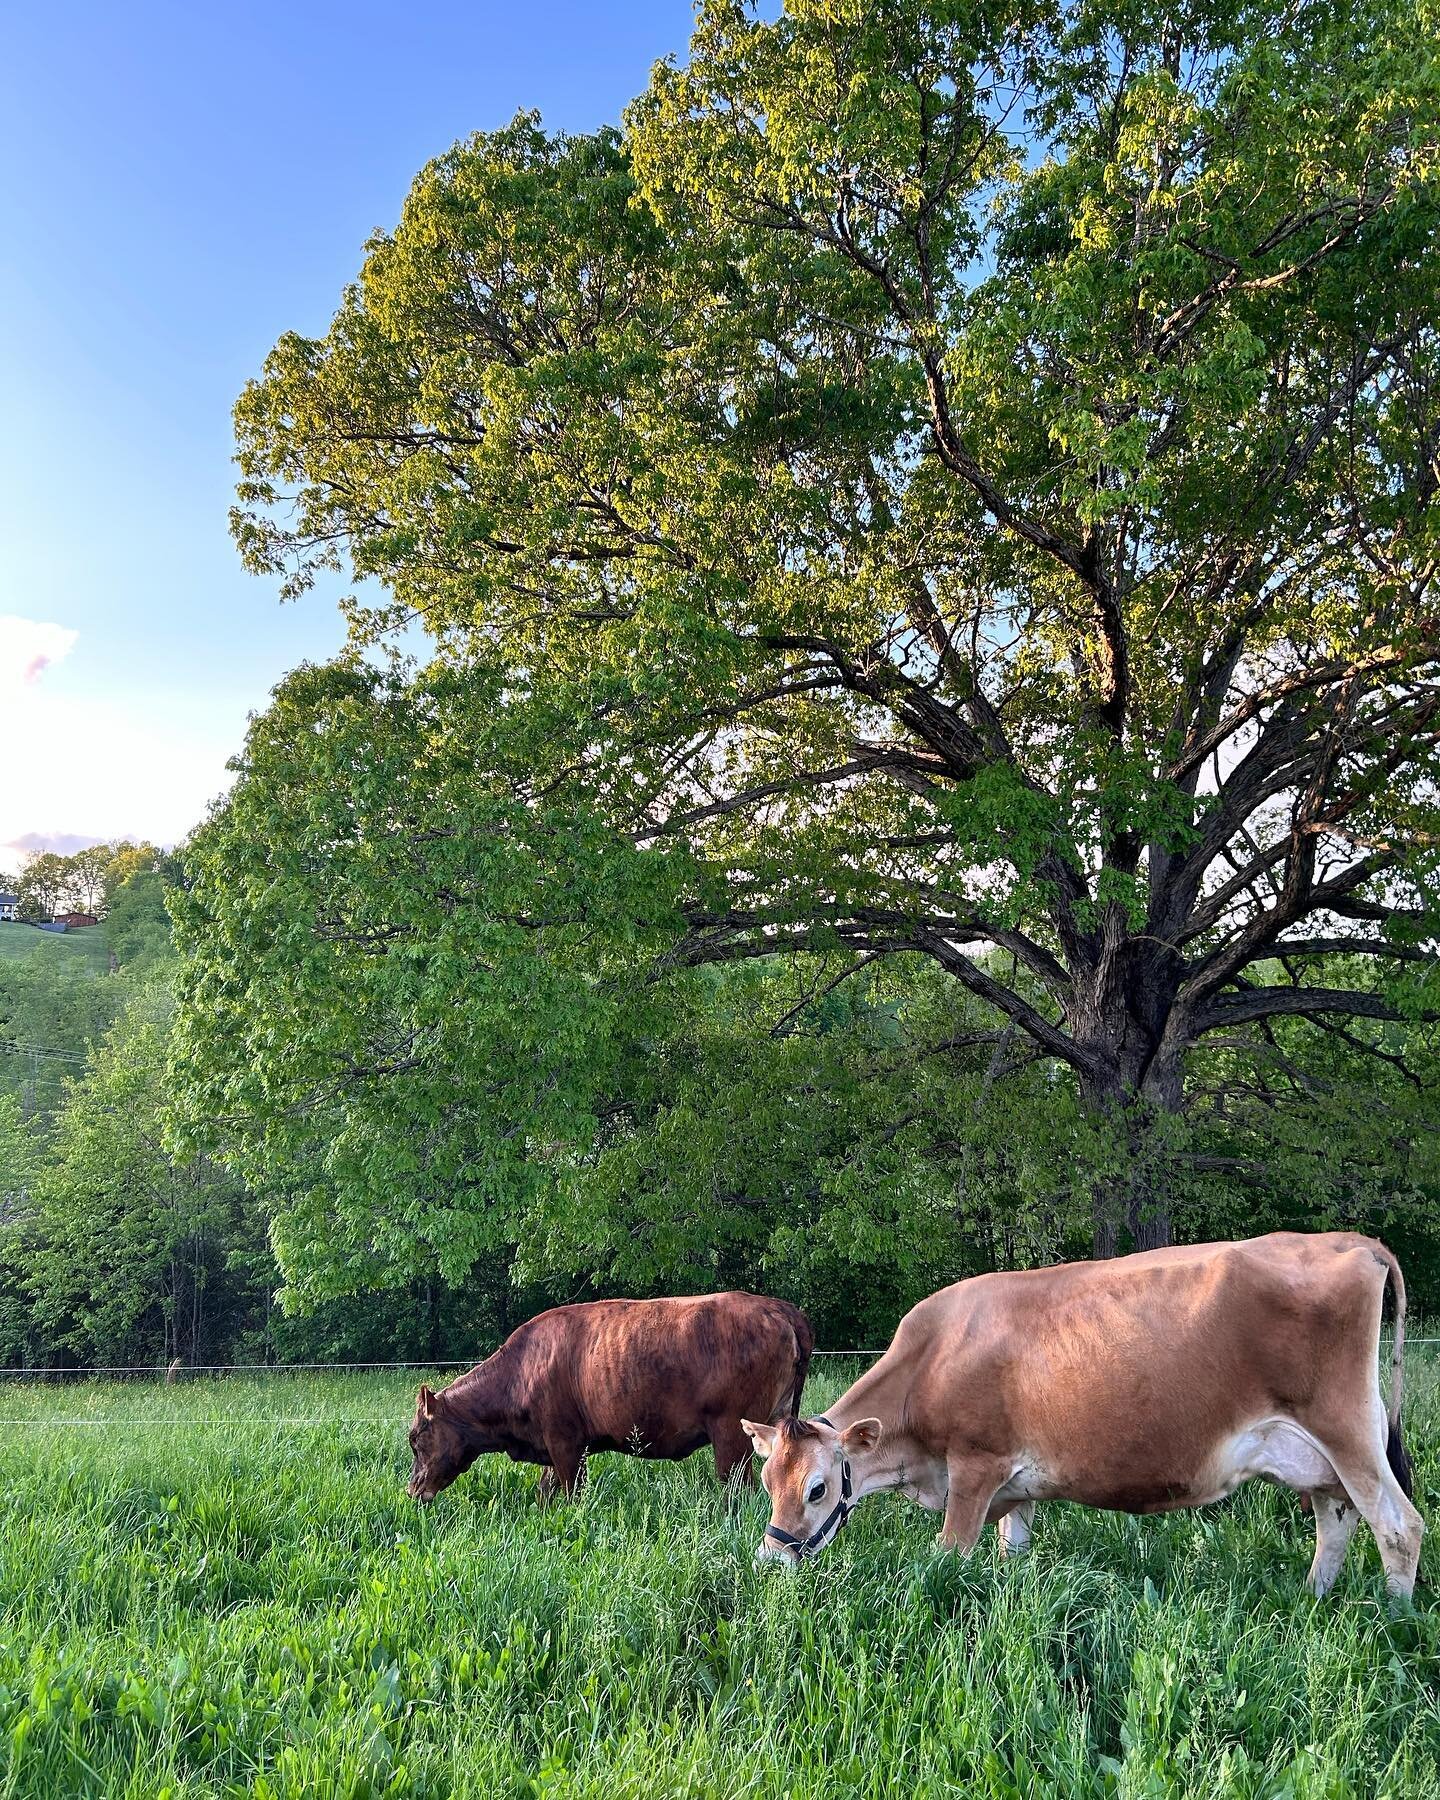 Cows are such an incredible animal. They turn grass into the most nutrient dense food there is. One cow can feed our family for a year with their meat and organs, and one cow can supply many families with their dairy needs for the year too. All of th